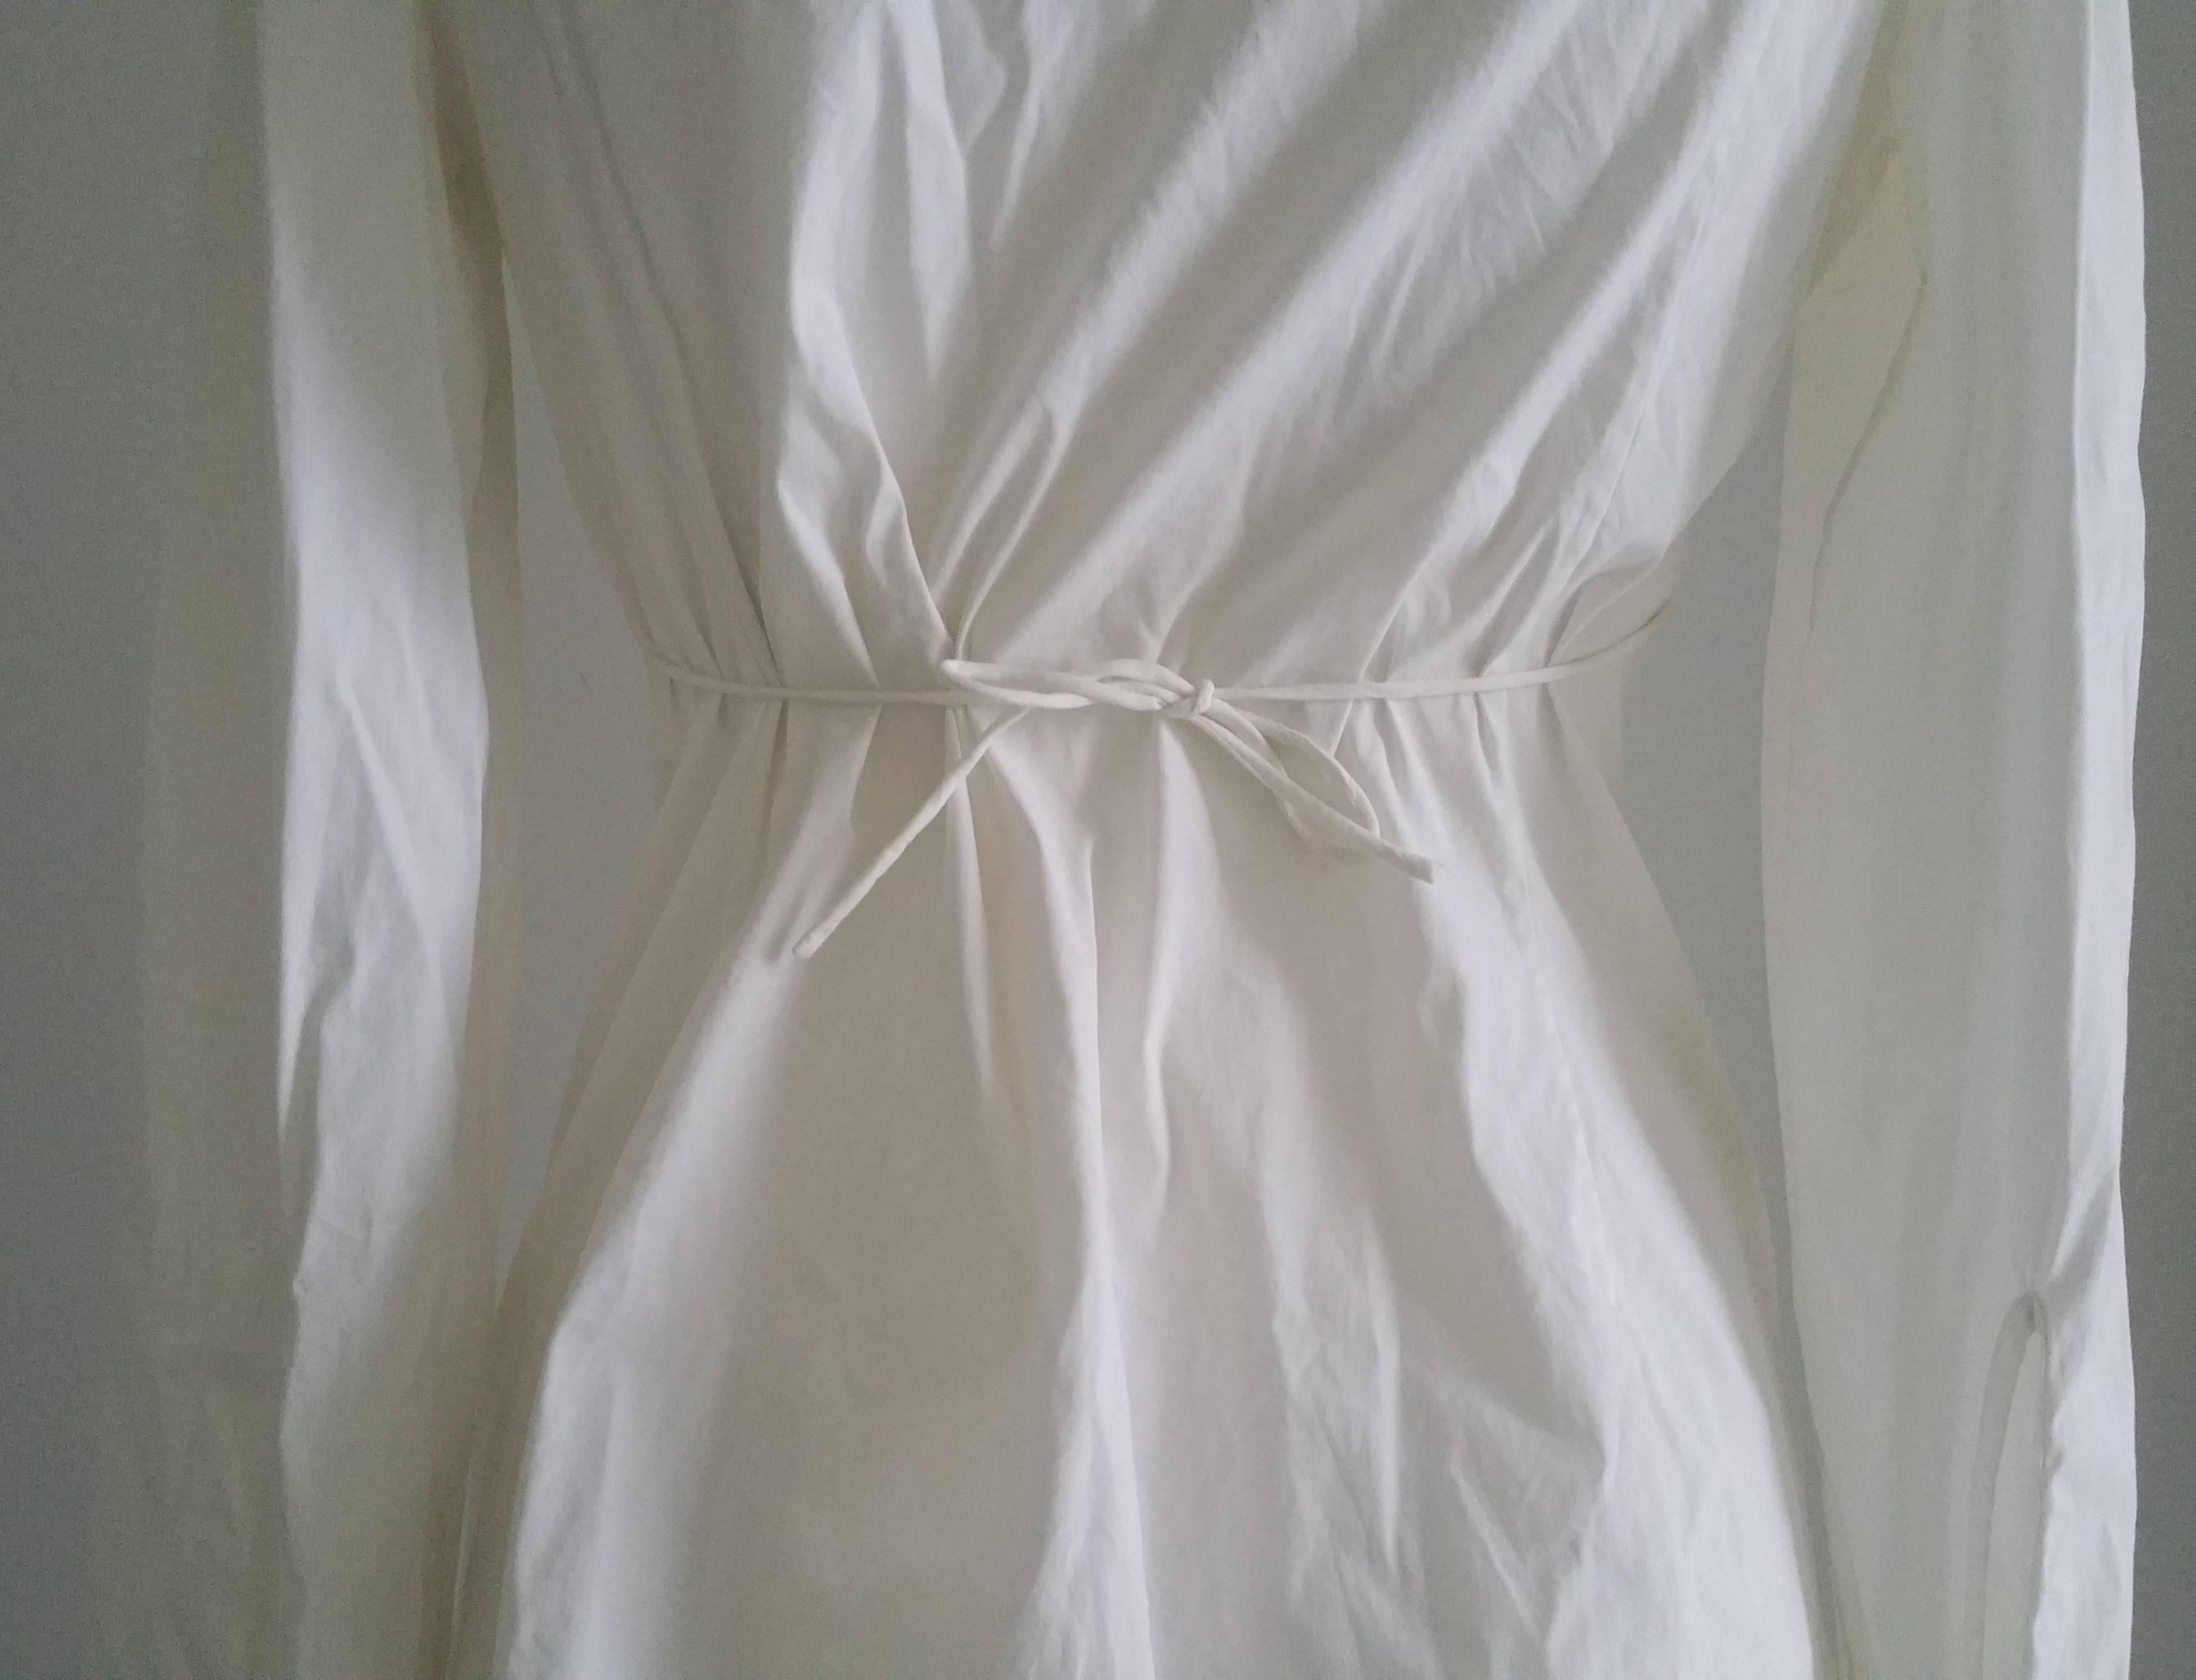 Women's 1990s Gucci by Tom Ford white shirt